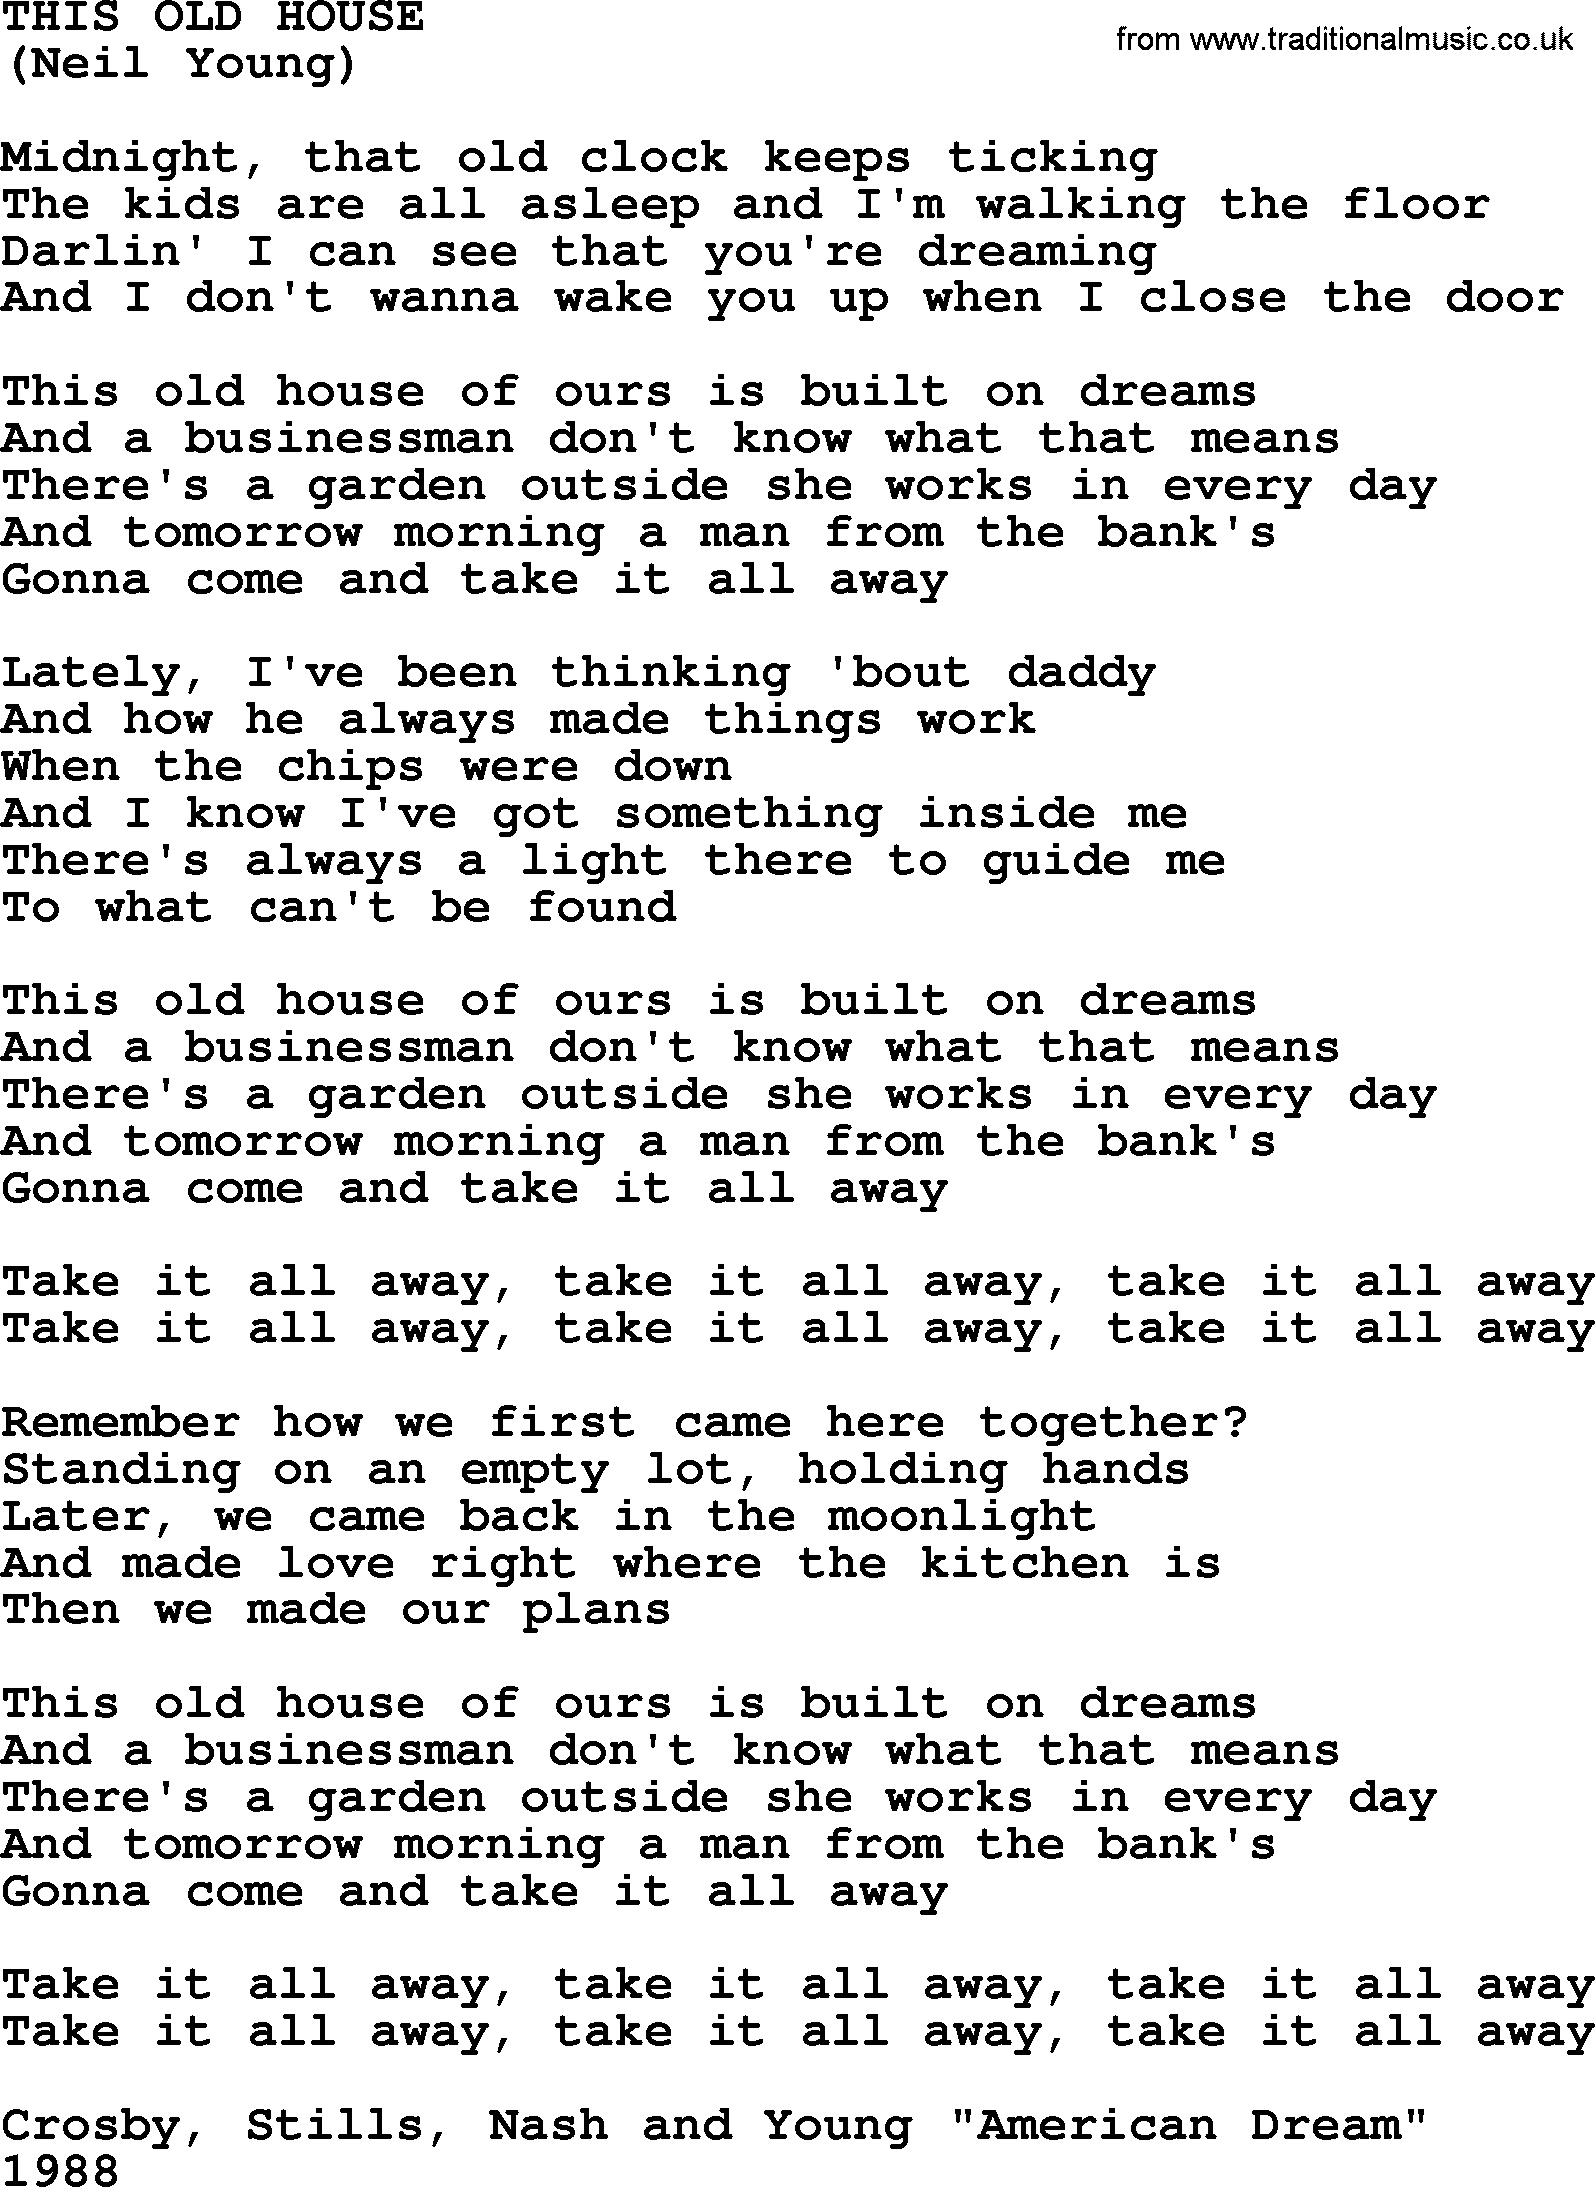 The Byrds song This Old House, lyrics